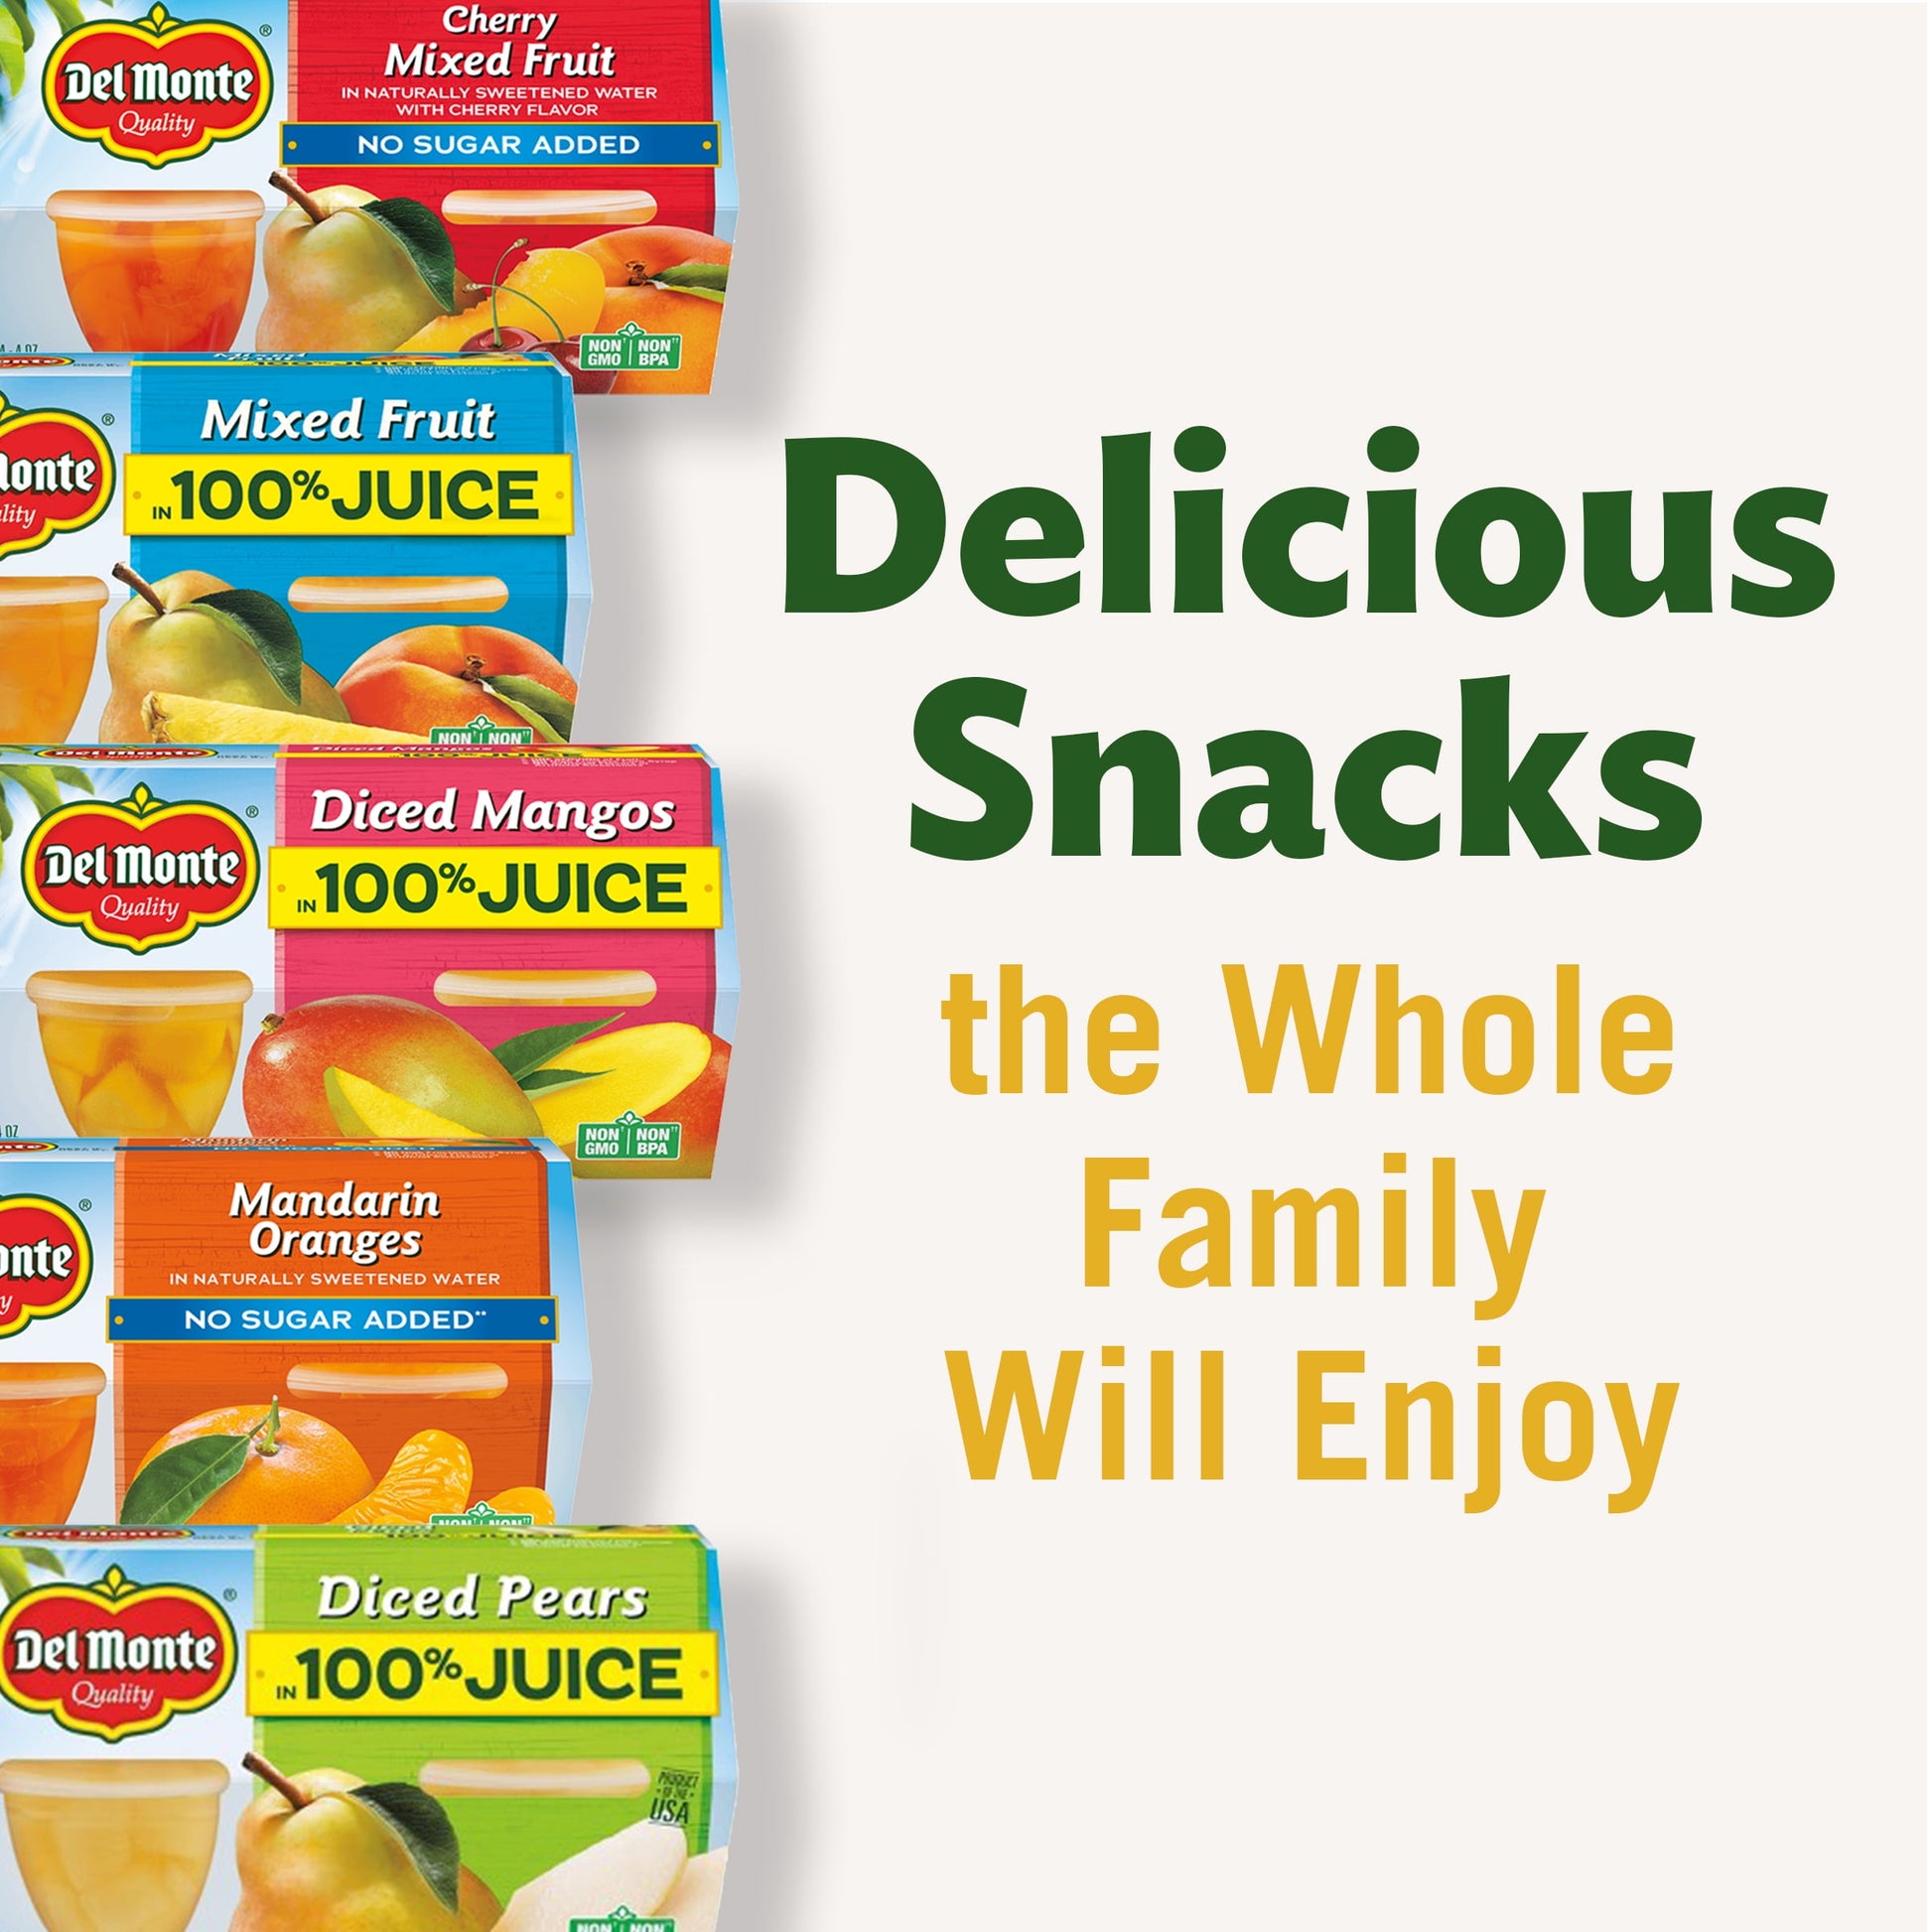 Diced Peaches FRUIT CUP Snacks, 100% Juice, 12 Pack, 4 Oz